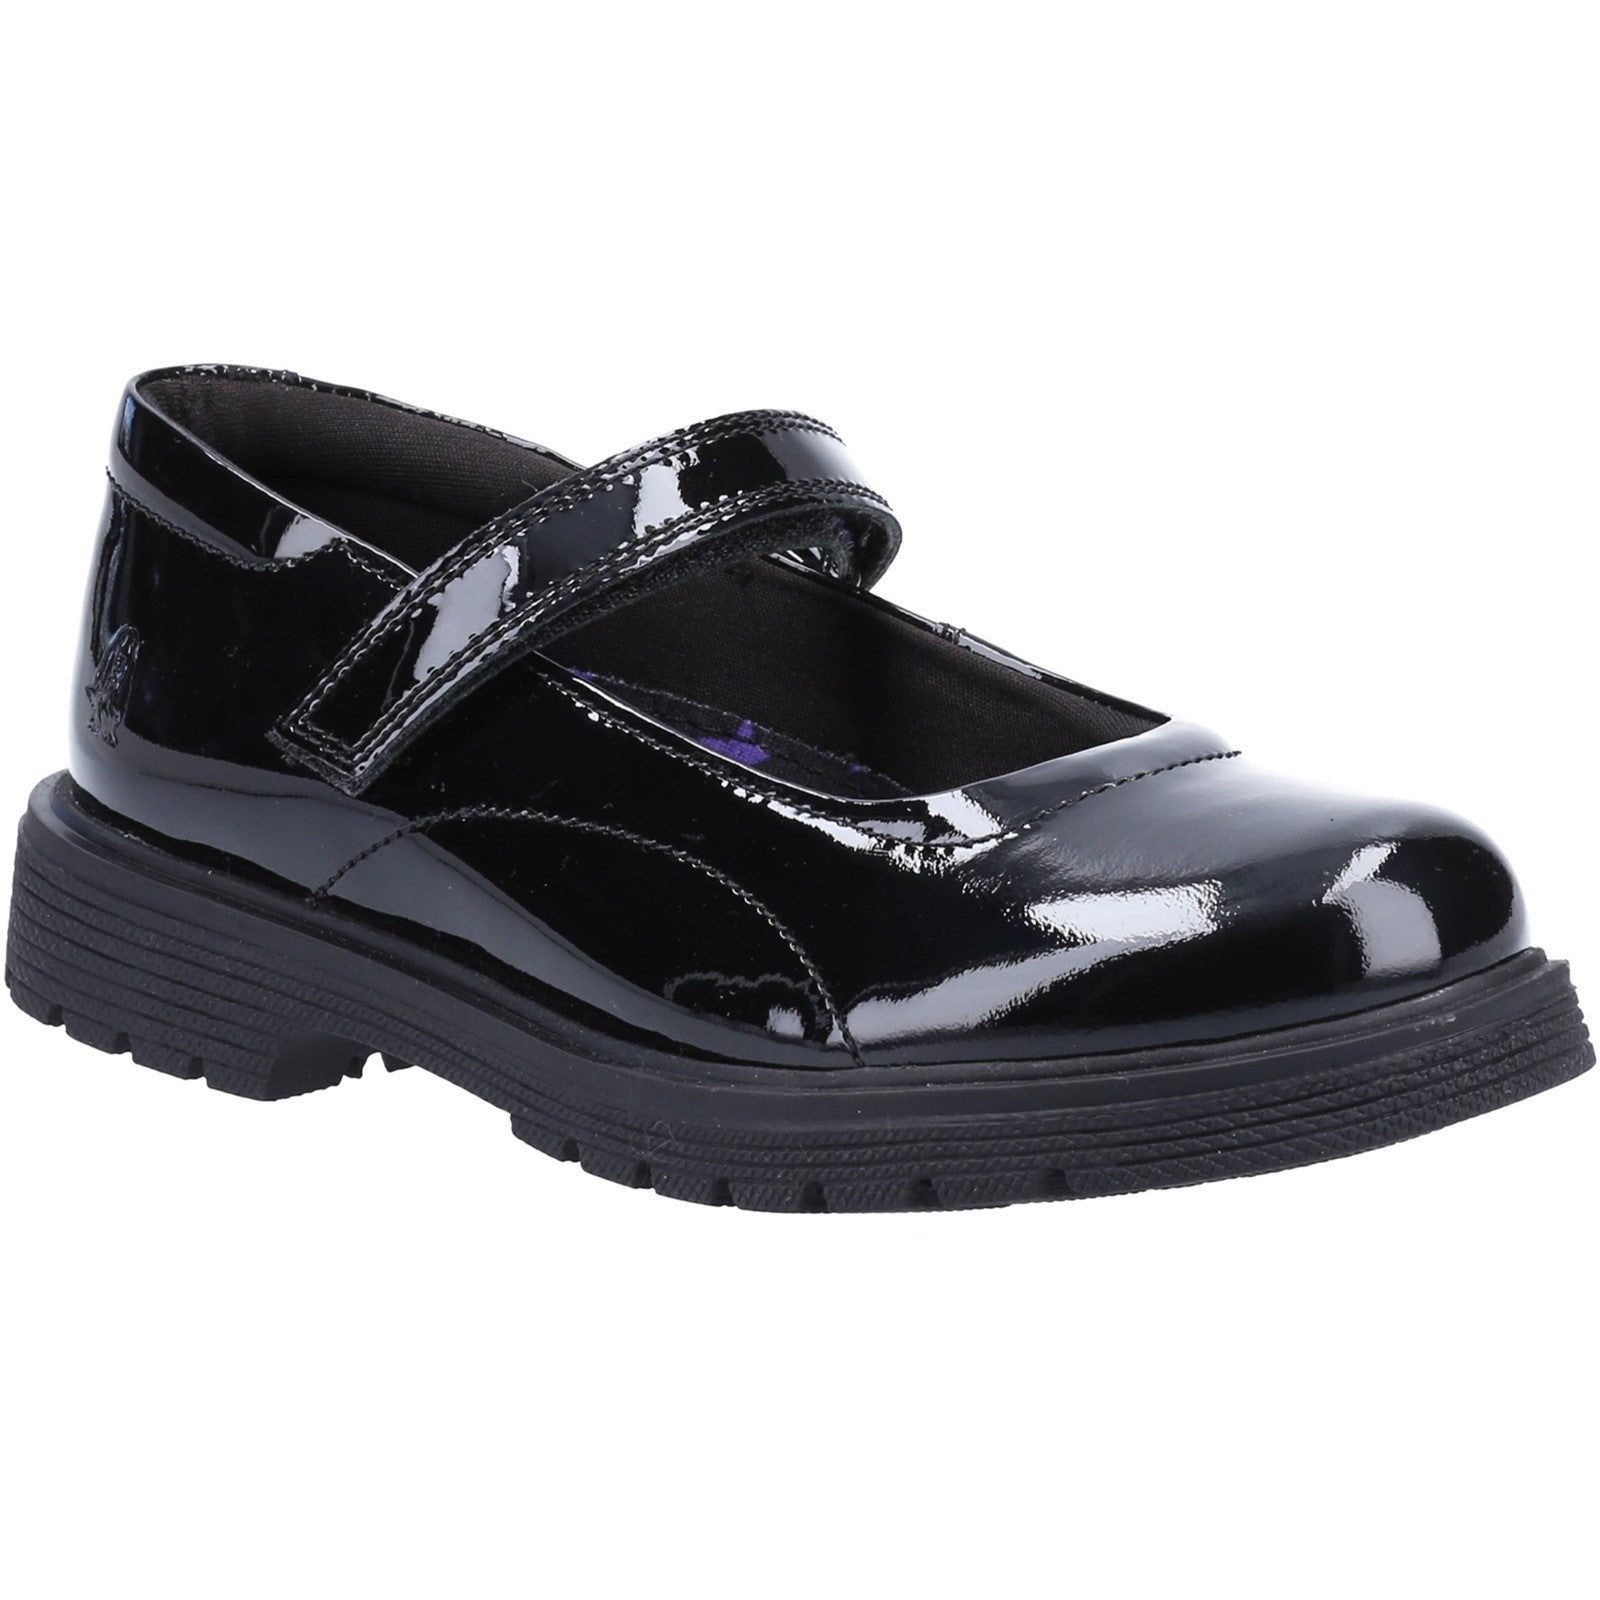 Hush Puppies Girls Tally Patent Leather School Shoes - Black